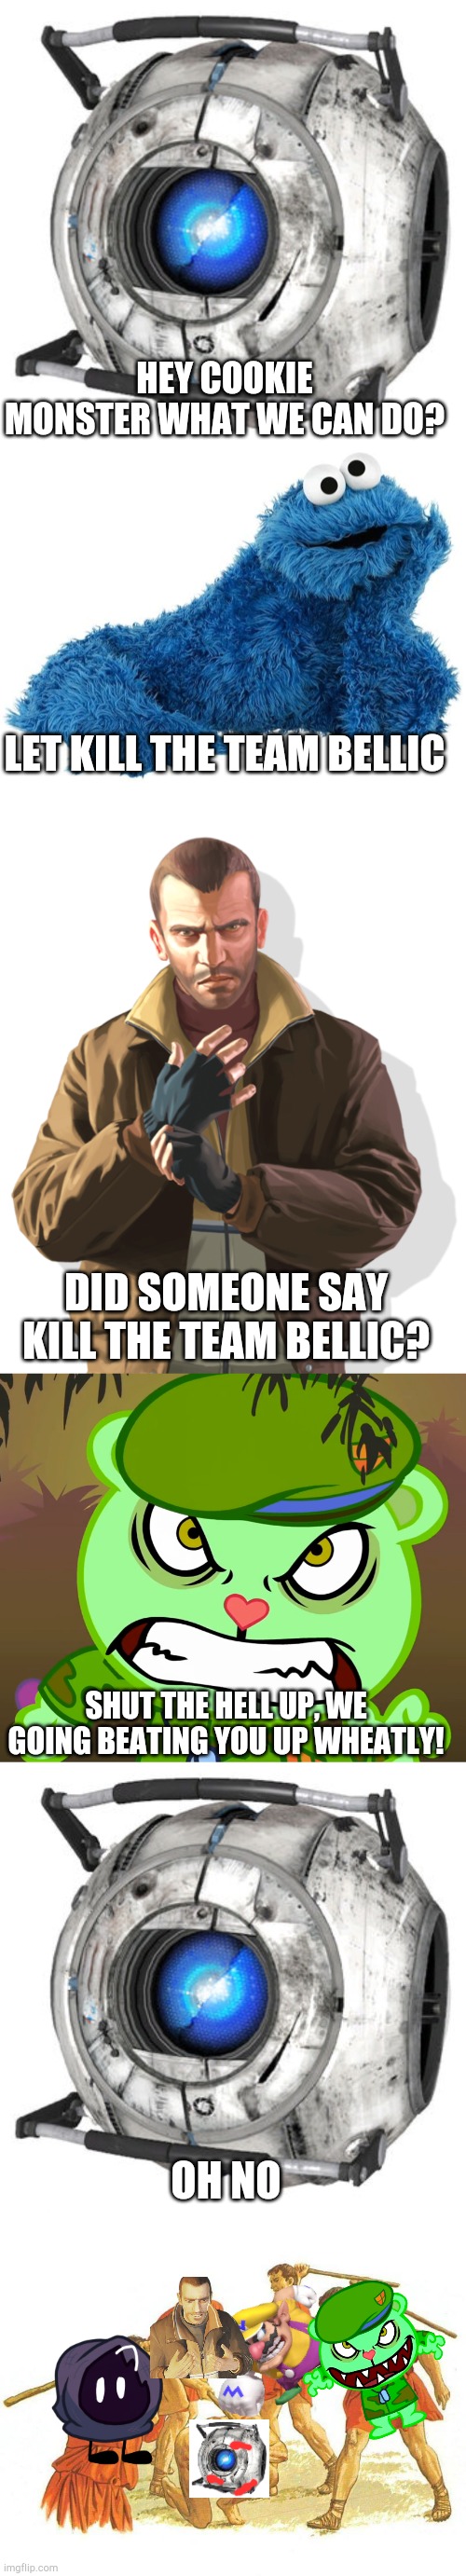 we are beating team w******y | HEY COOKIE MONSTER WHAT WE CAN DO? LET KILL THE TEAM BELLIC; DID SOMEONE SAY KILL THE TEAM BELLIC? SHUT THE HELL UP, WE GOING BEATING YOU UP WHEATLY! OH NO | image tagged in beating up,team bellic,story,team wheatley sucks | made w/ Imgflip meme maker